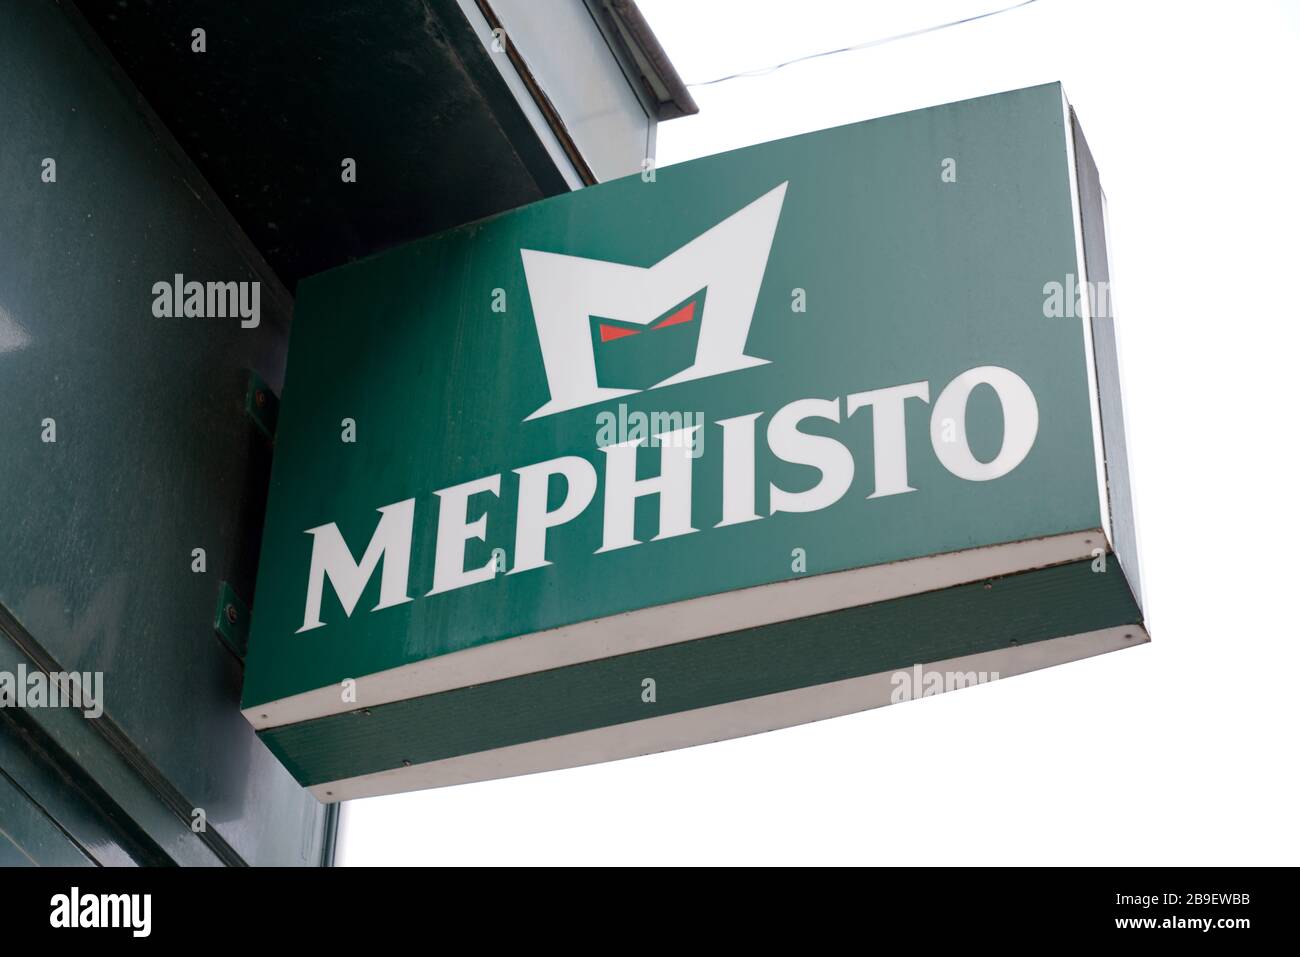 Bordeaux , Aquitaine / France - 10 06 2019 : Mephisto sign logo shop shoe  store of the brand shoes and footwear manufacturer Stock Photo - Alamy